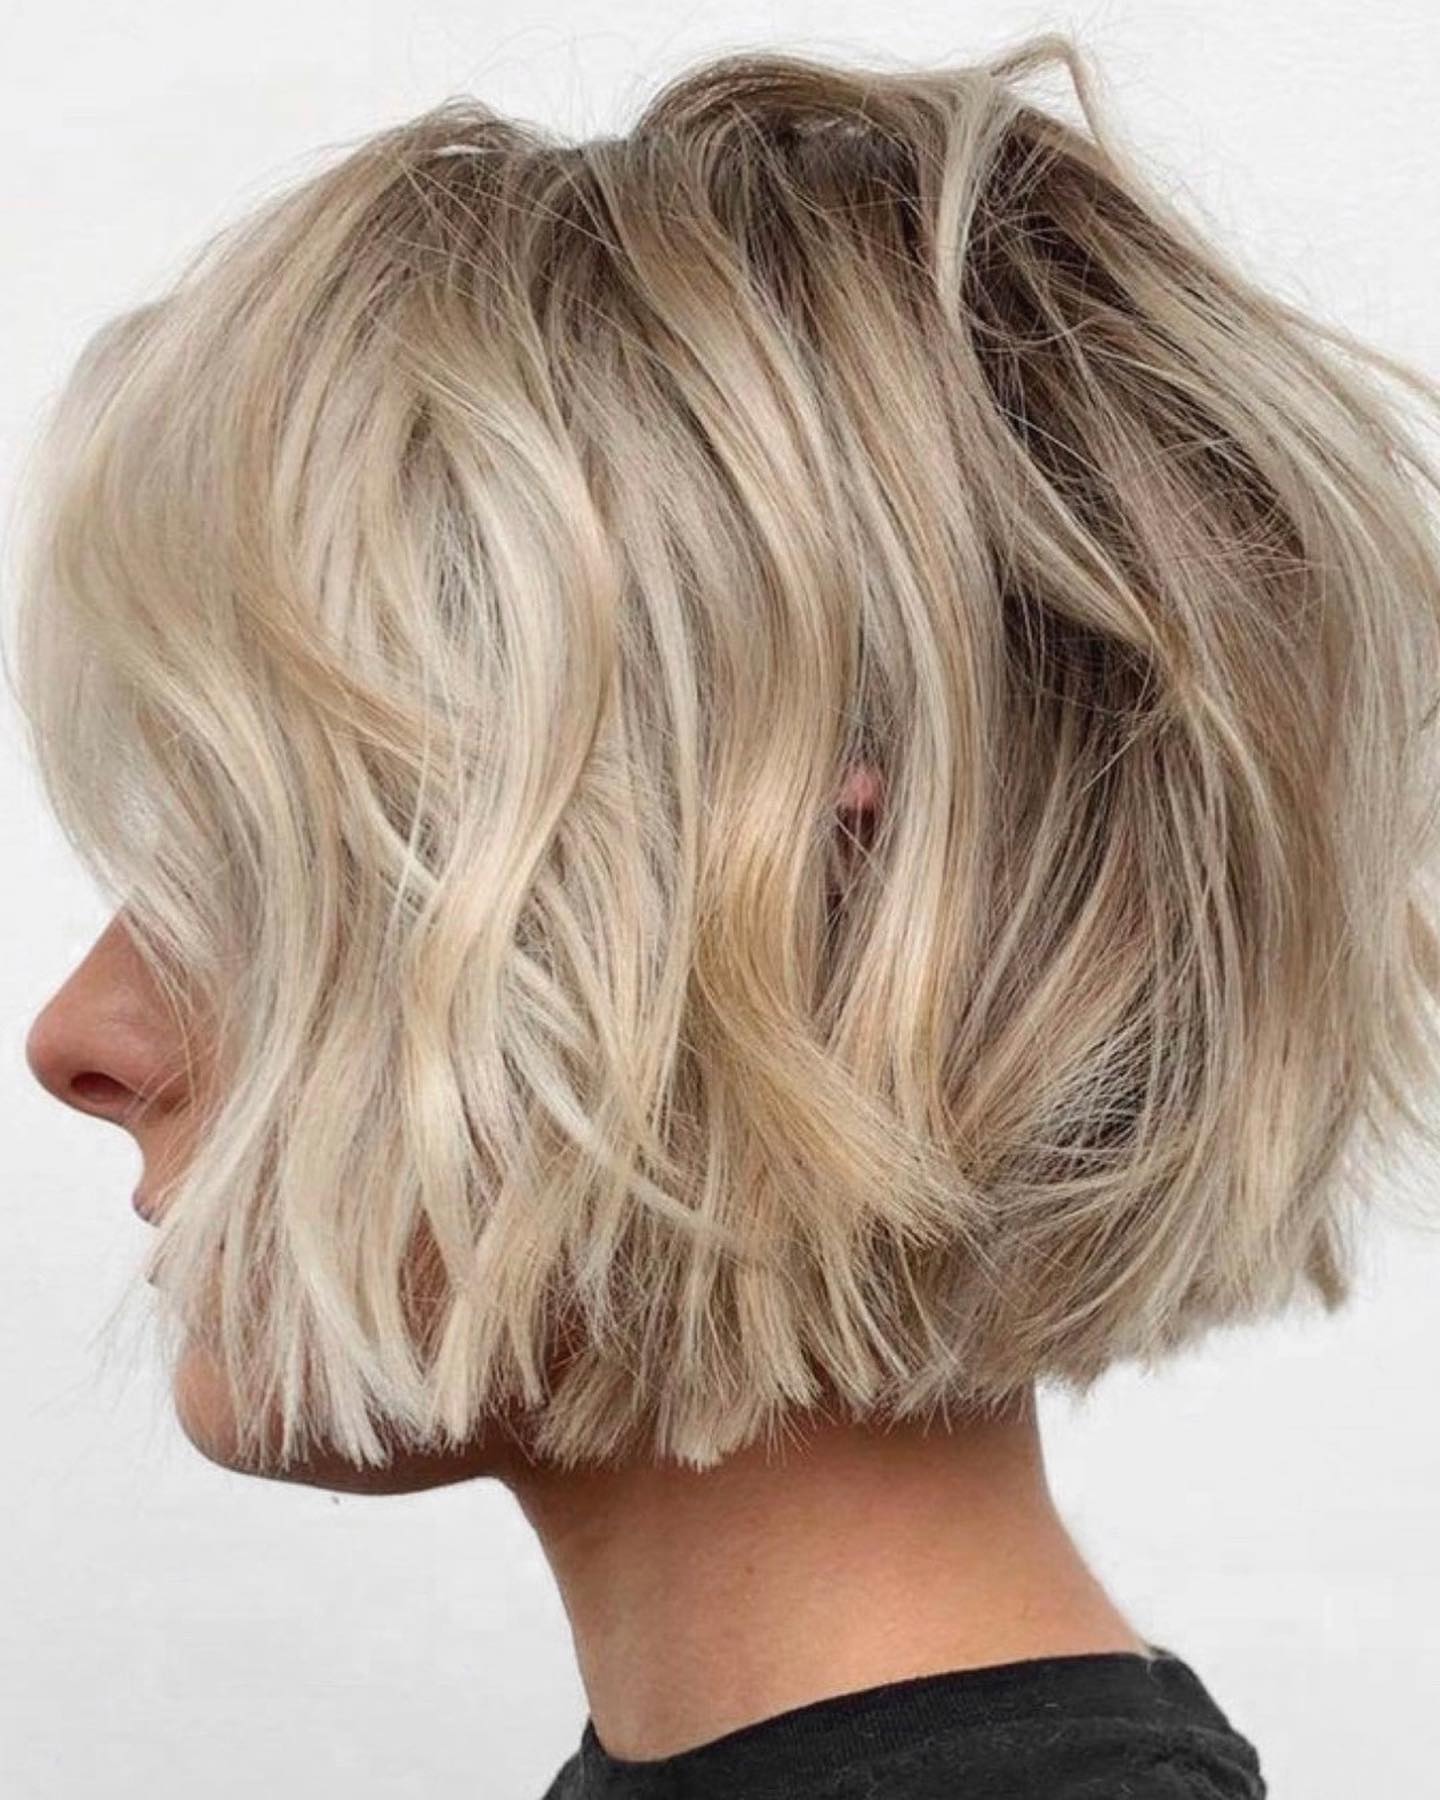 Jaw length 77 Chin length hair with layers | Jaw length hairstyle | Jaw-length bob Jaw Length Hairstyles for Women